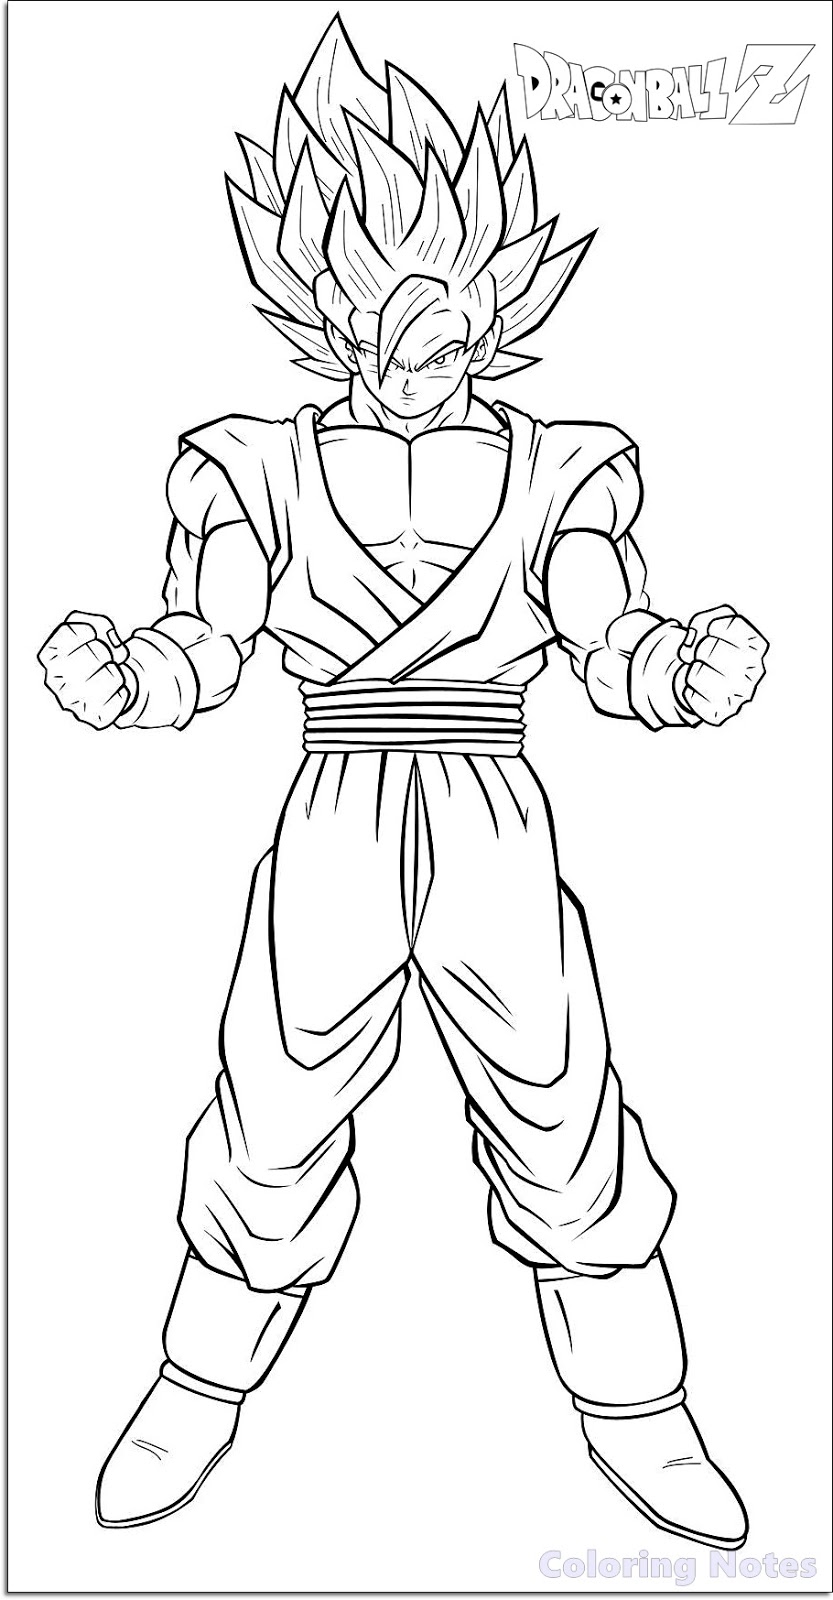 11-free-dragon-ball-z-coloring-pages-printable-for-kids-coloring